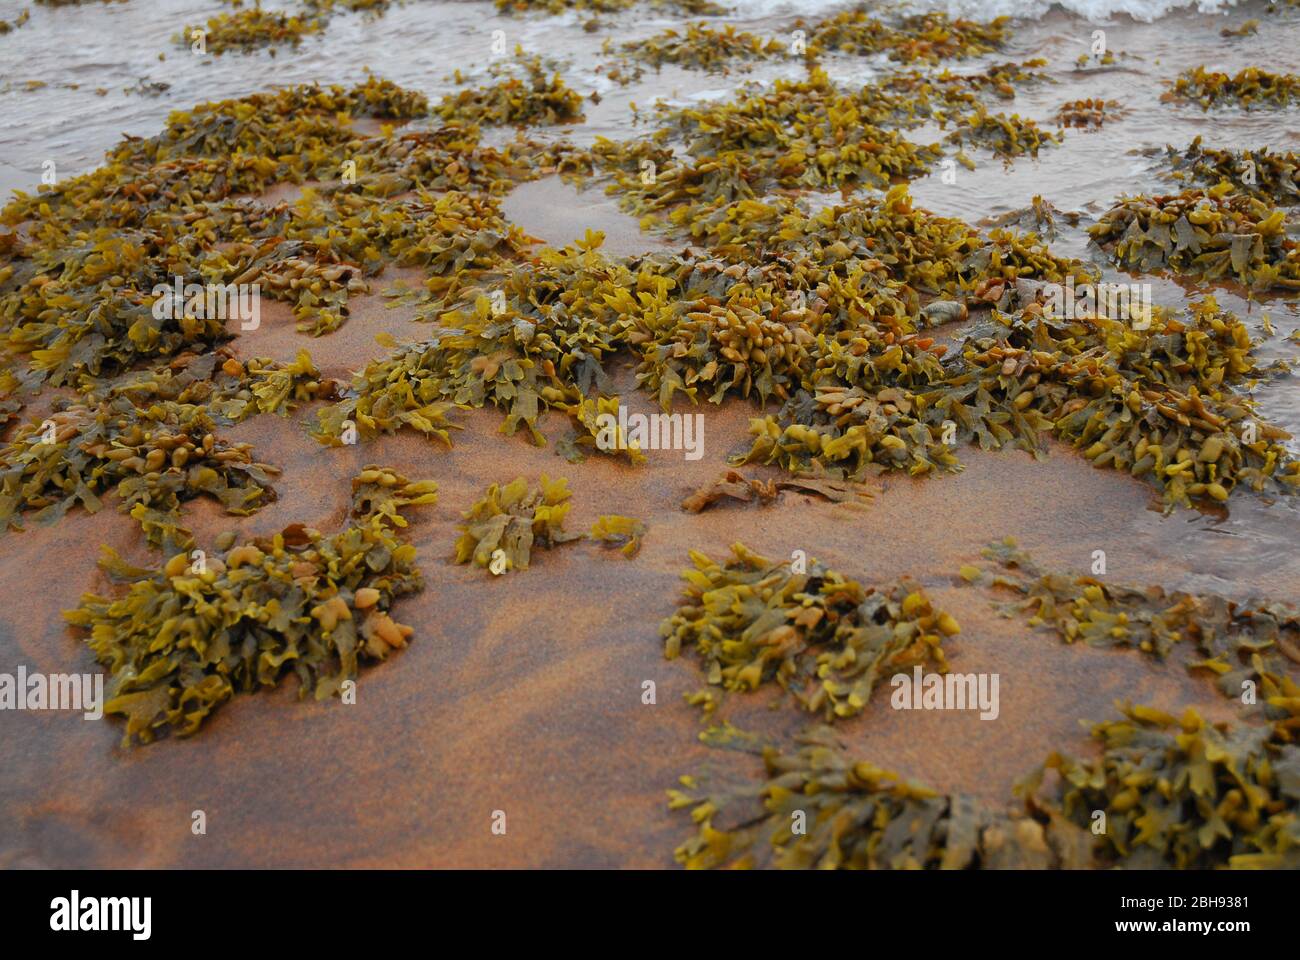 green seaweed on red sand Stock Photo